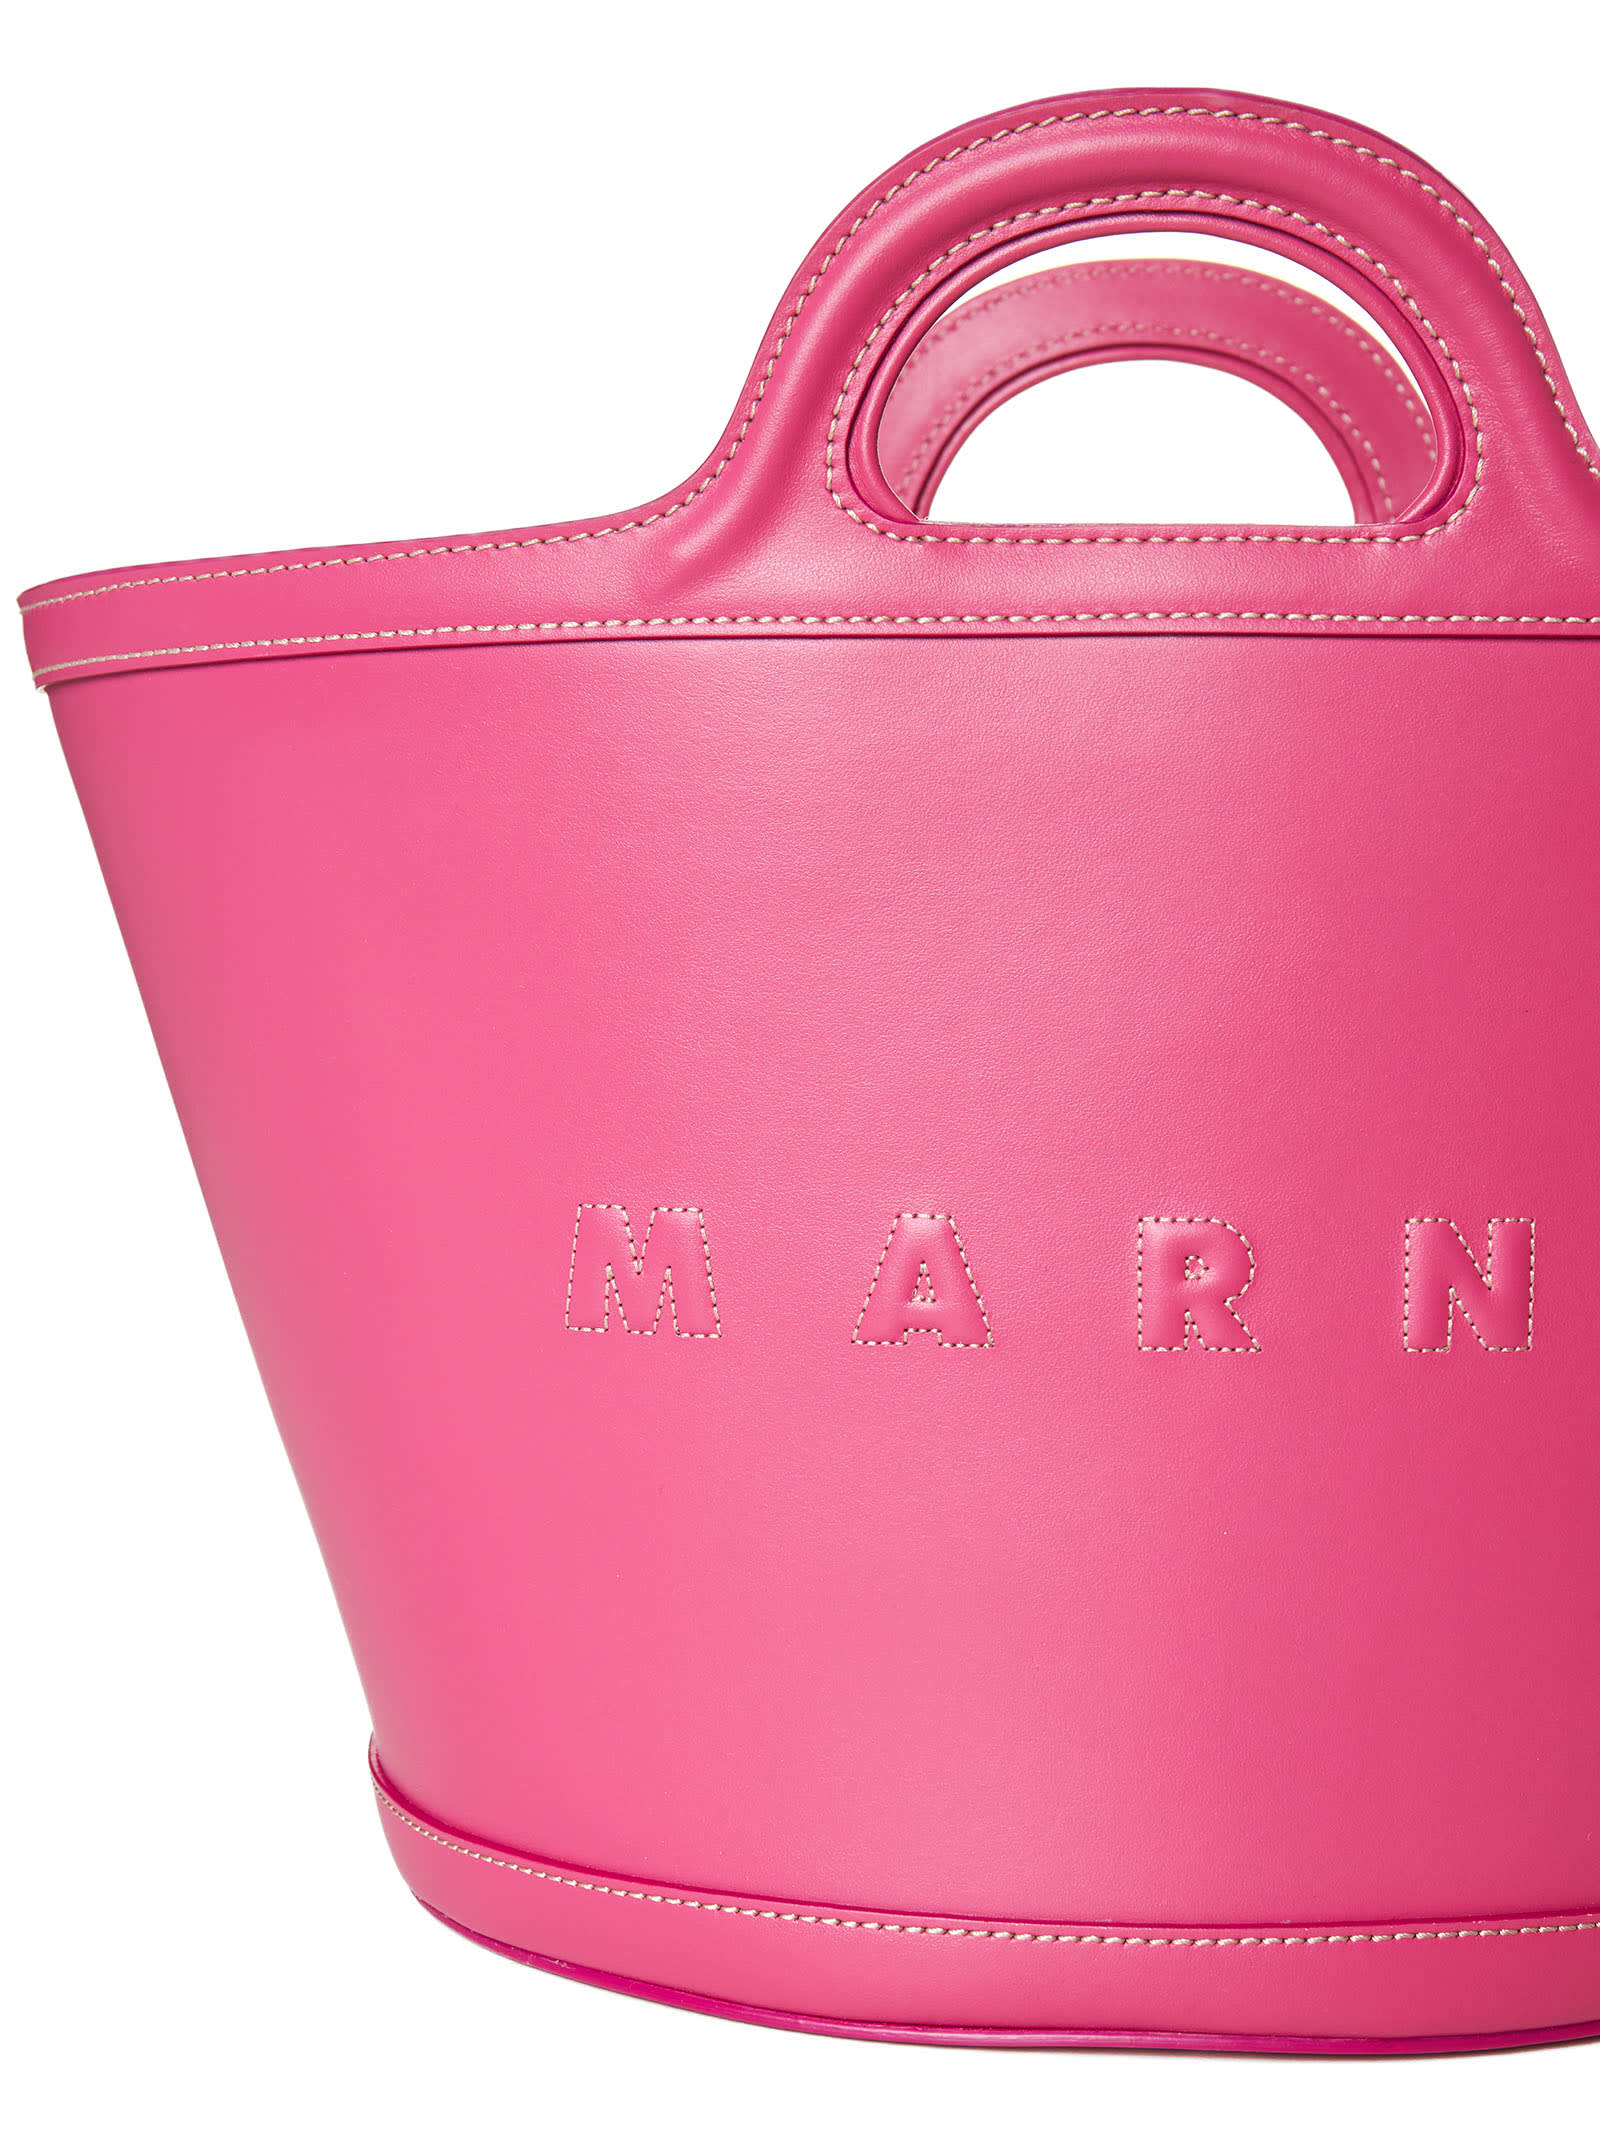 Shop Marni Tote In Light Orchid